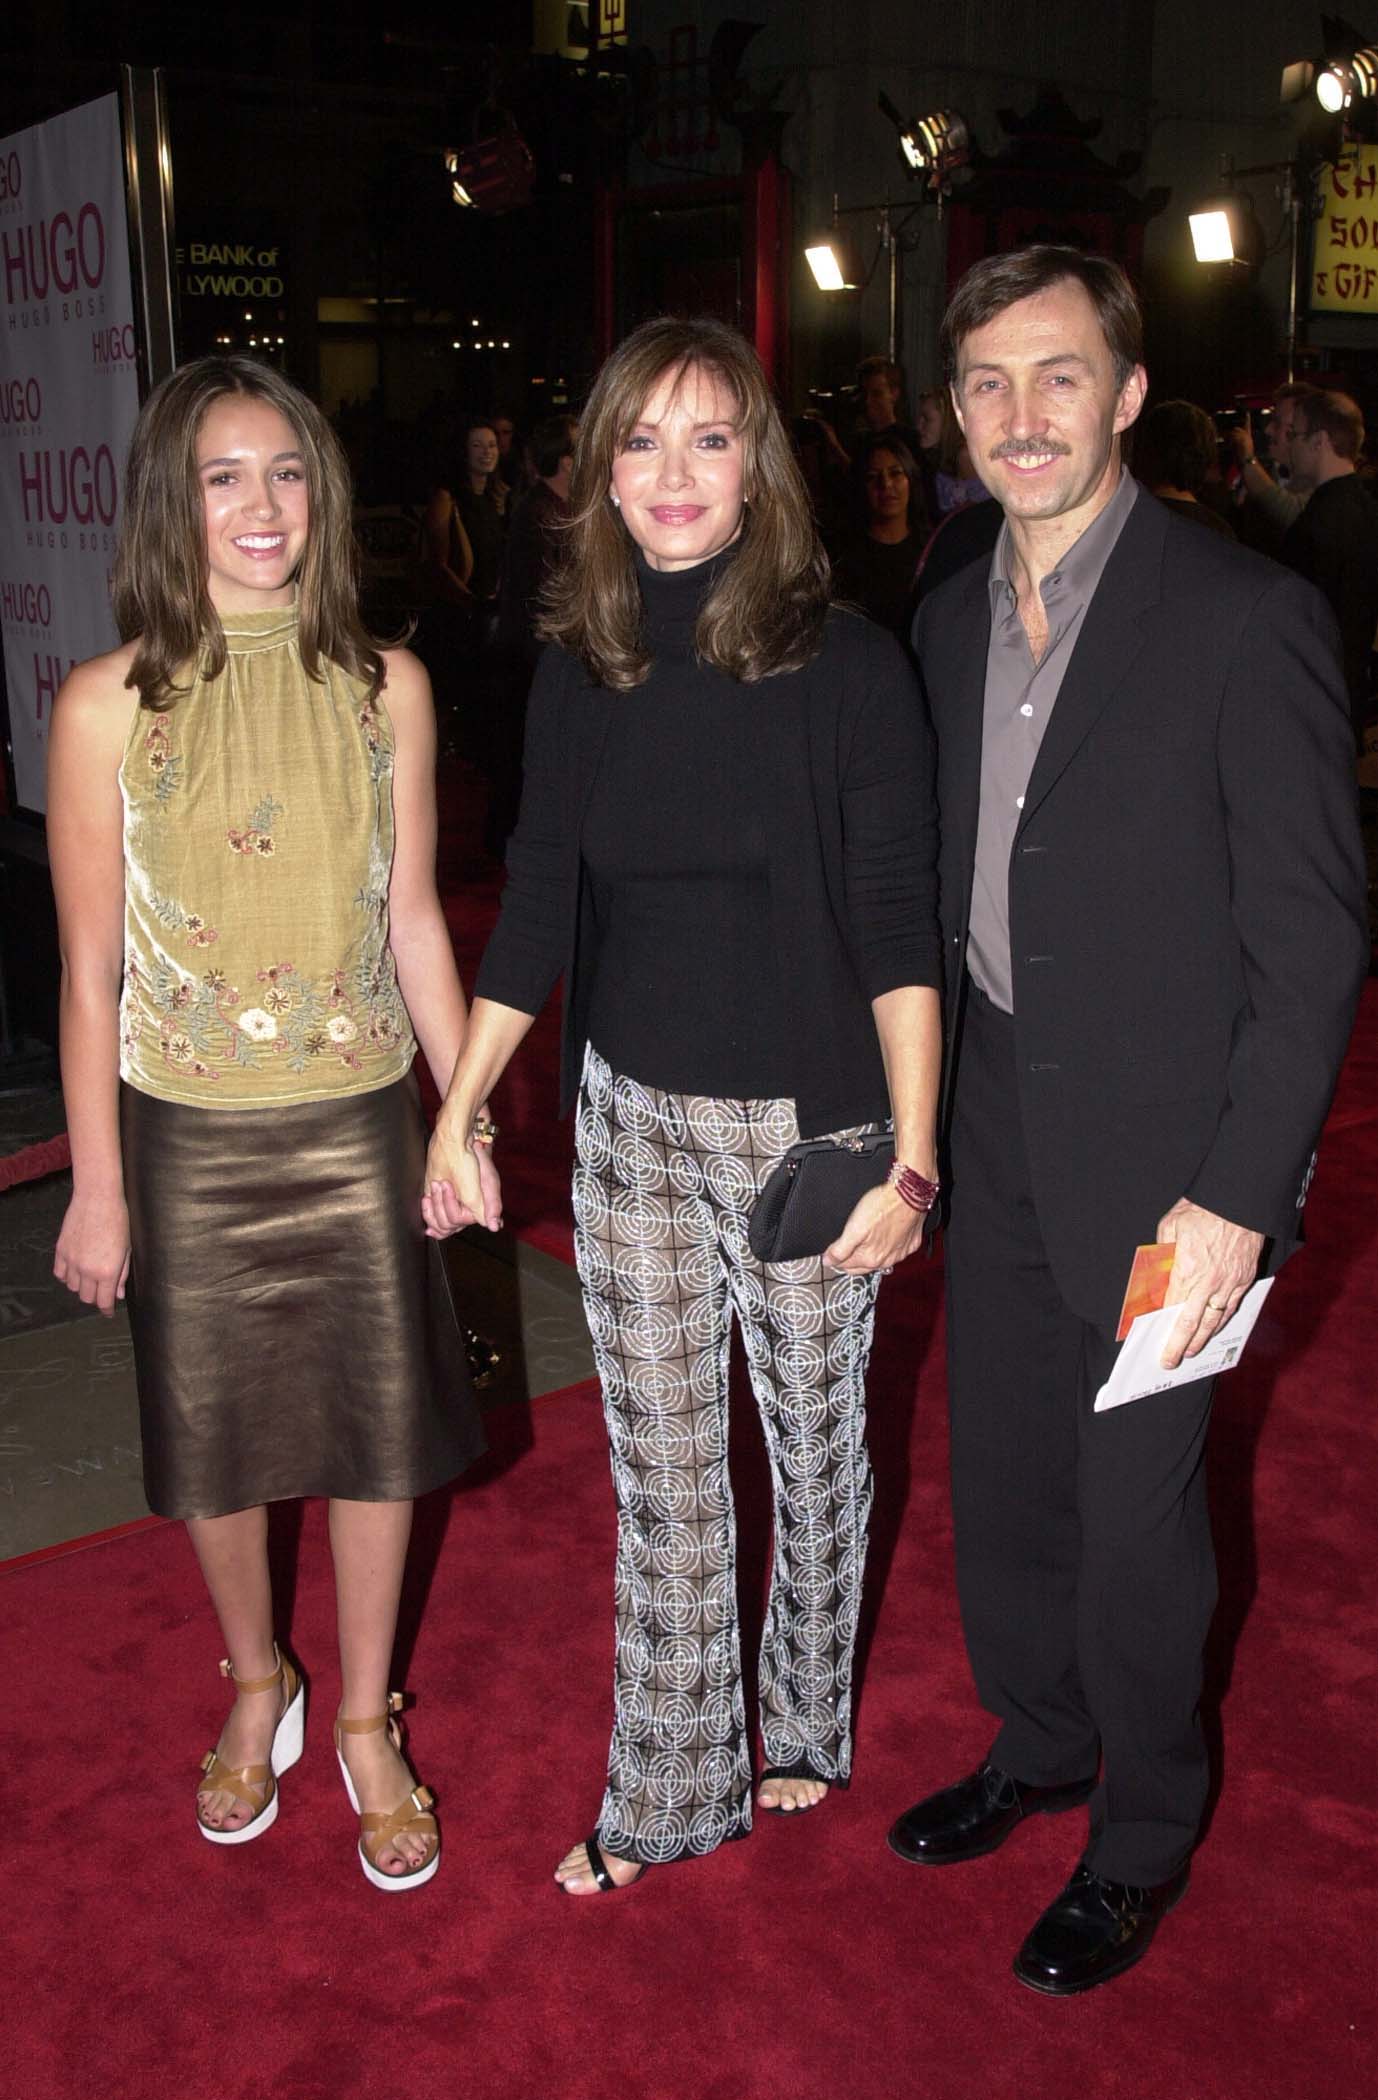 Spencer Margaret Smith, Jaclyn Smith and Brad Allen | Source: Getty Images